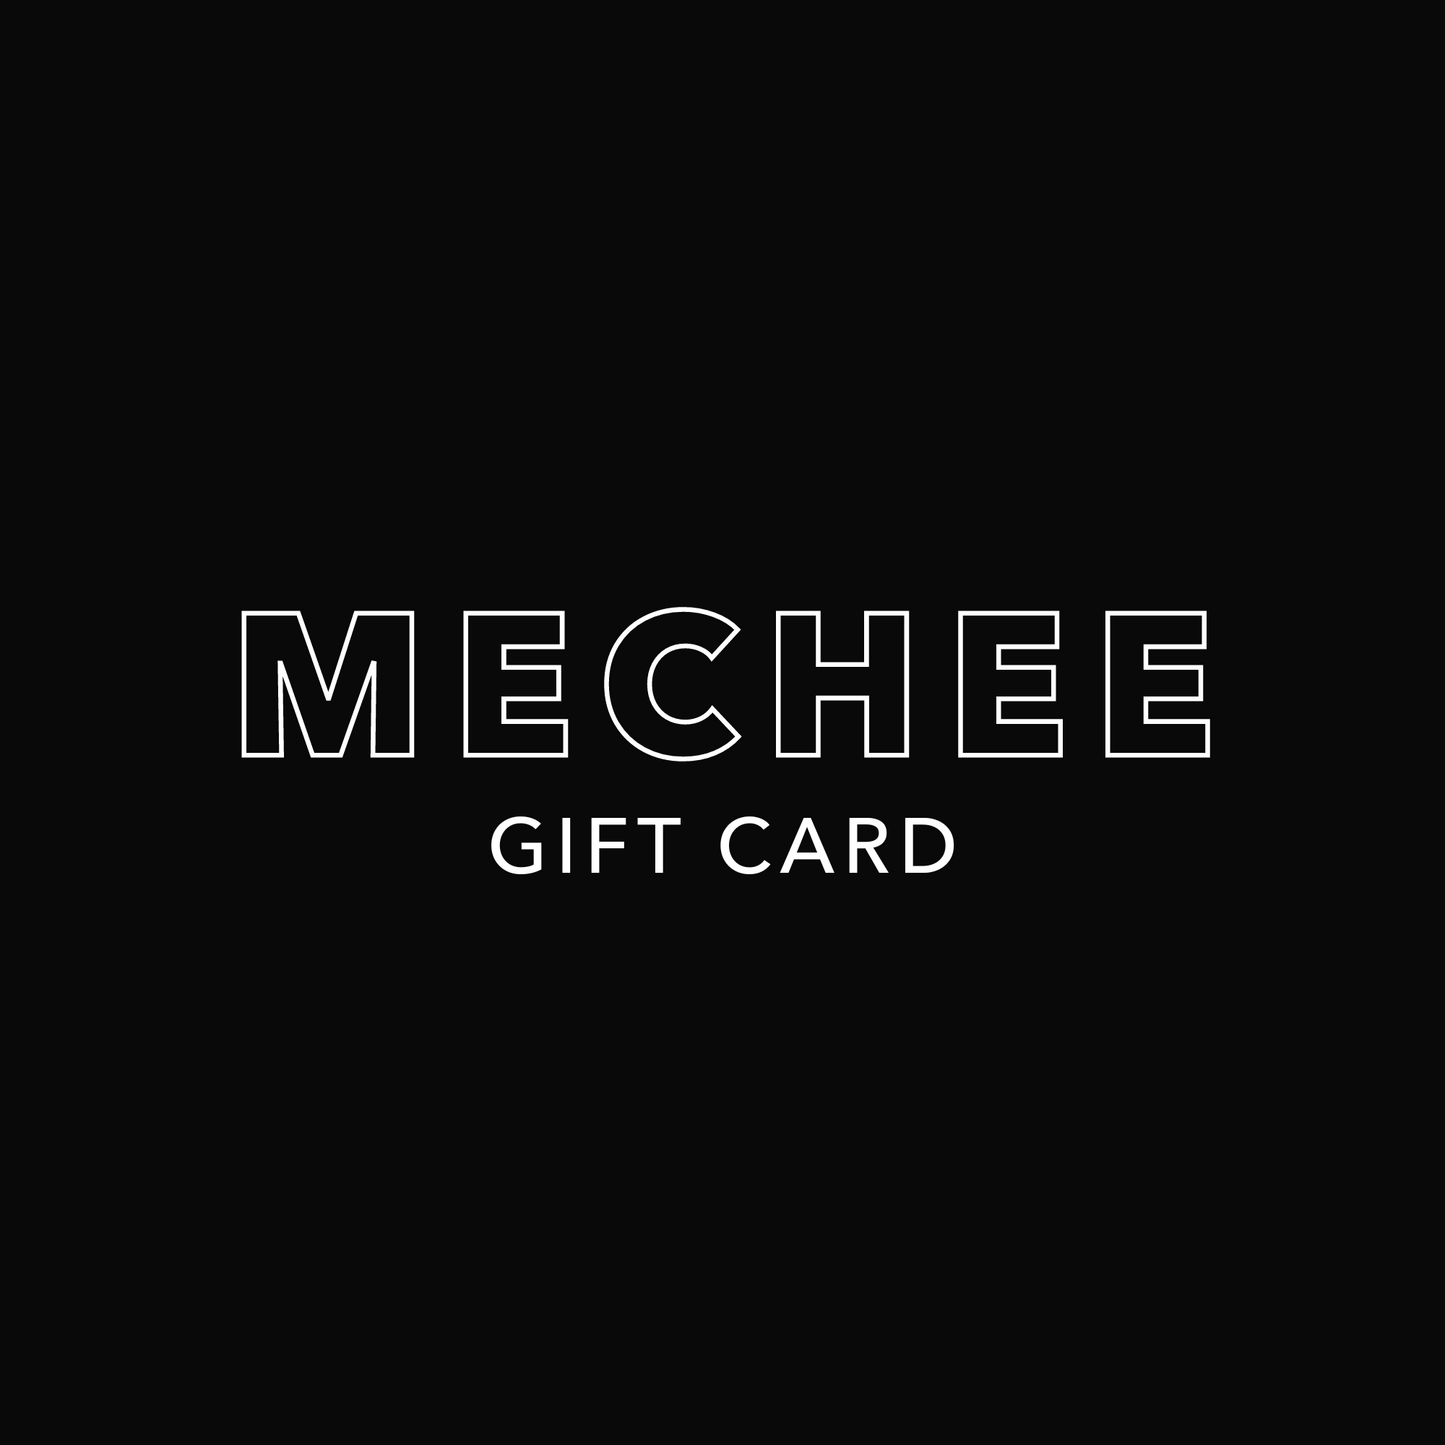 MECHEE GIFT CARD in white letters on Black Background